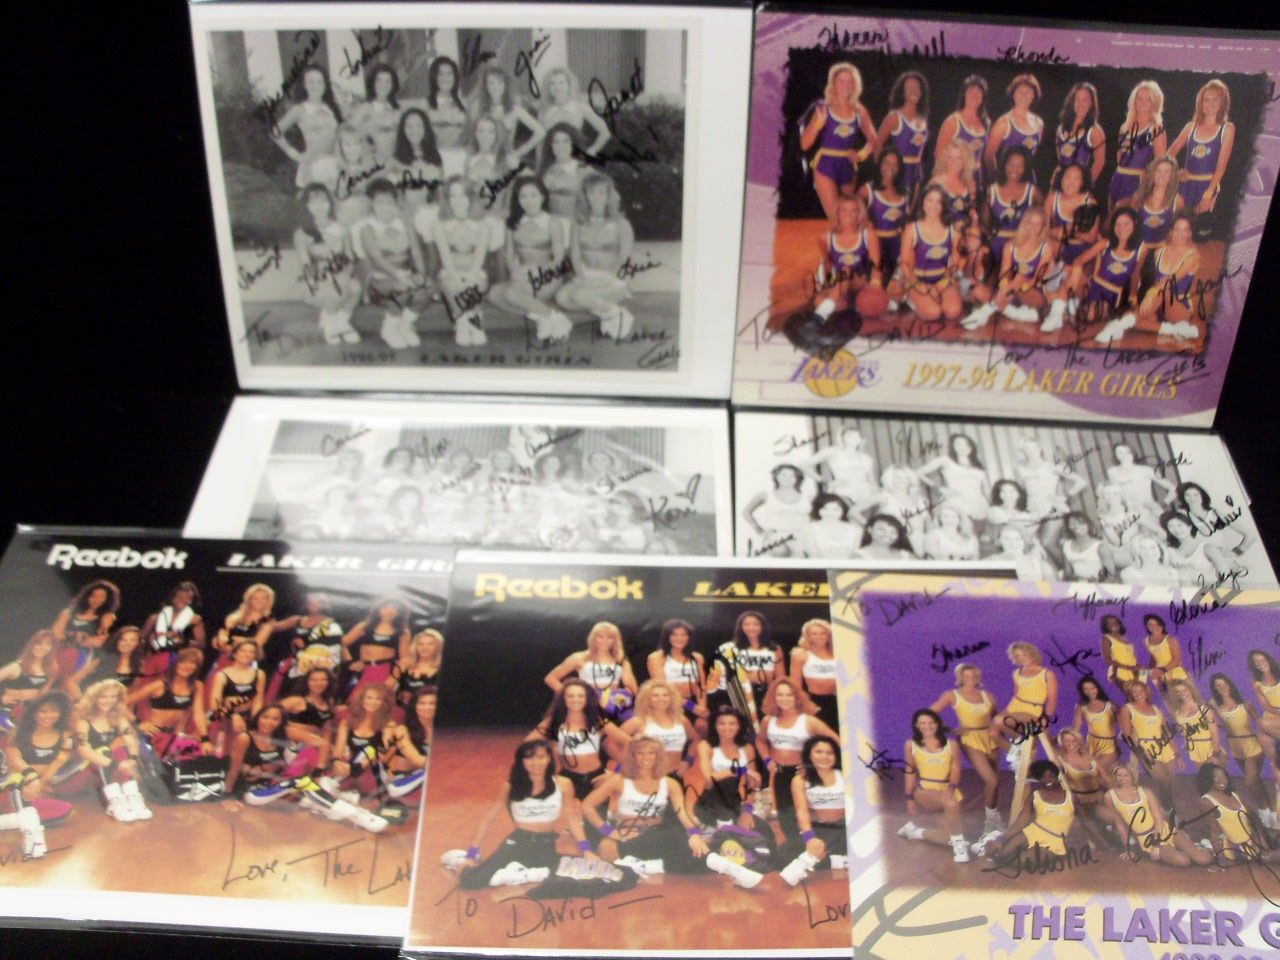 1994-1995 Los Angeles Lakers team pictures 8 1/2 by 11 with